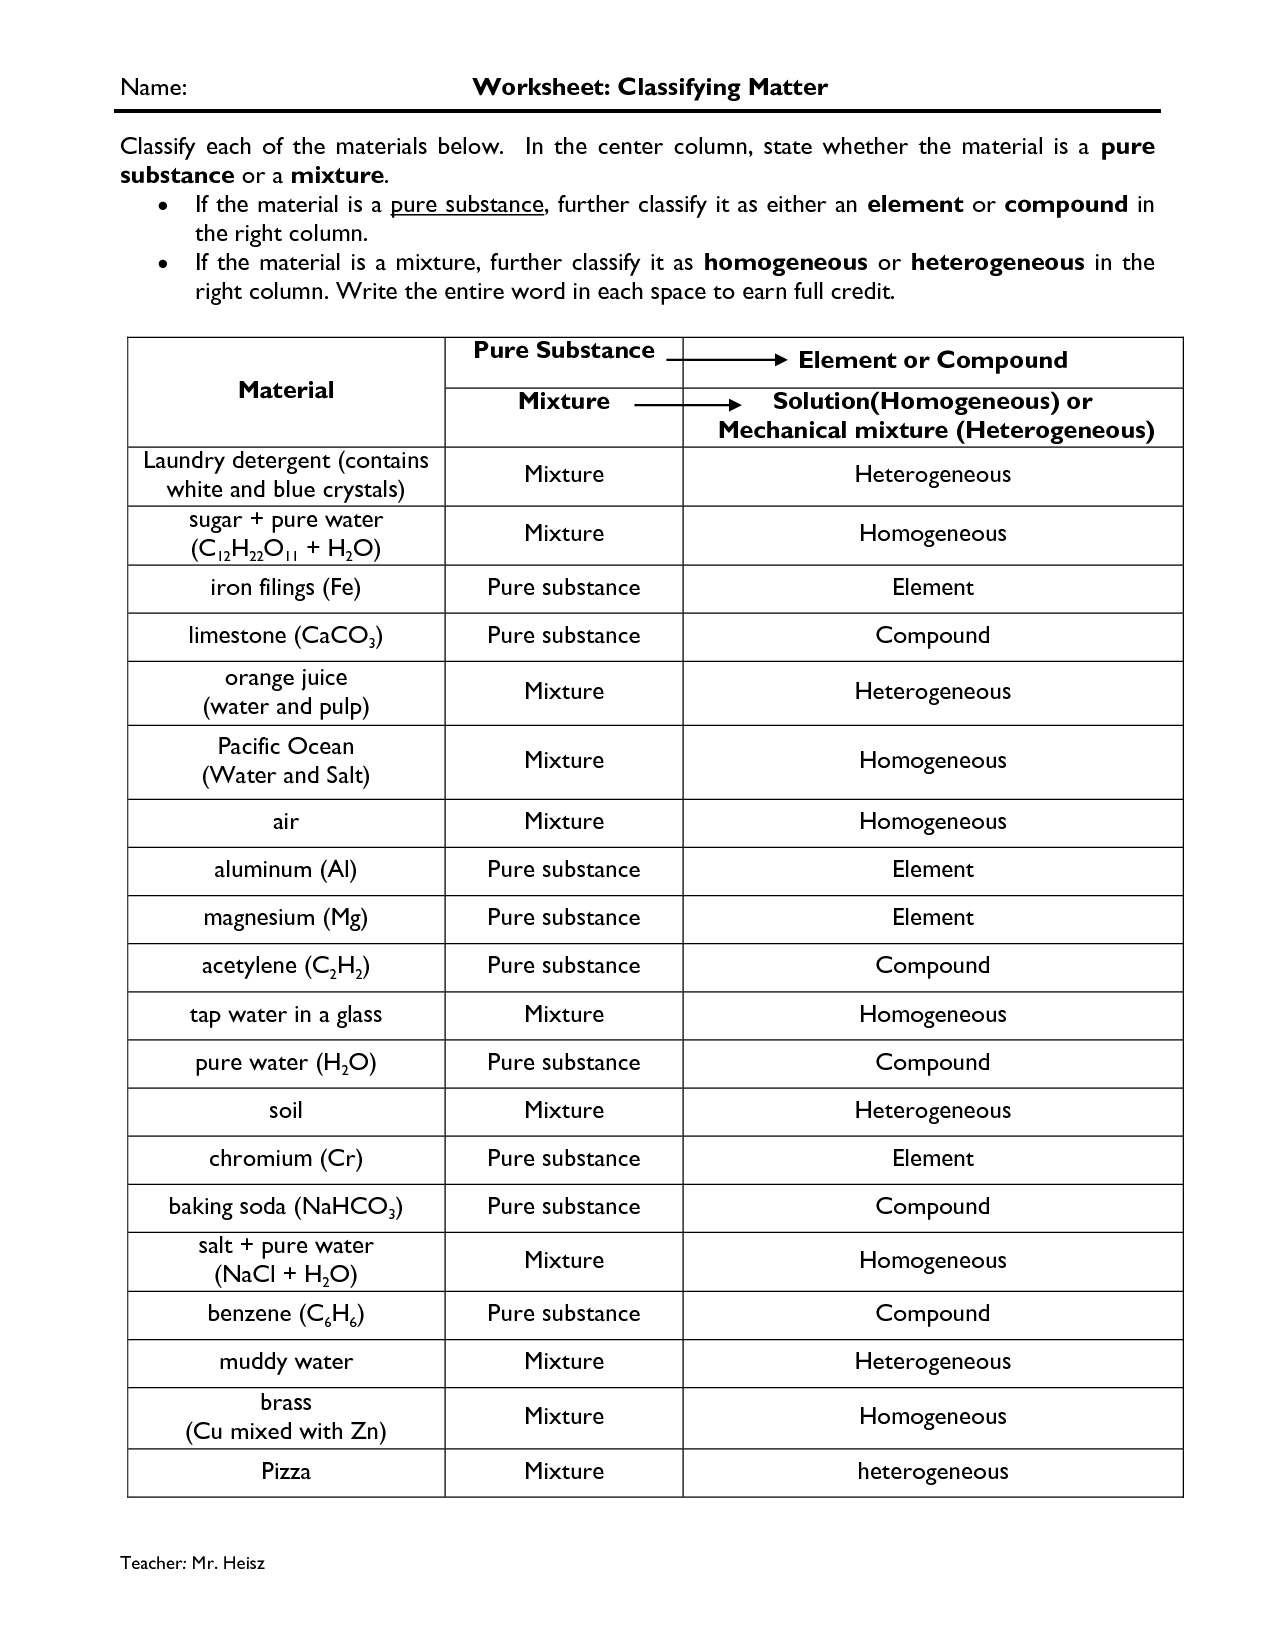 14 Best Images of Classification Of Matter Worksheet  States of Matter Worksheet Answers 